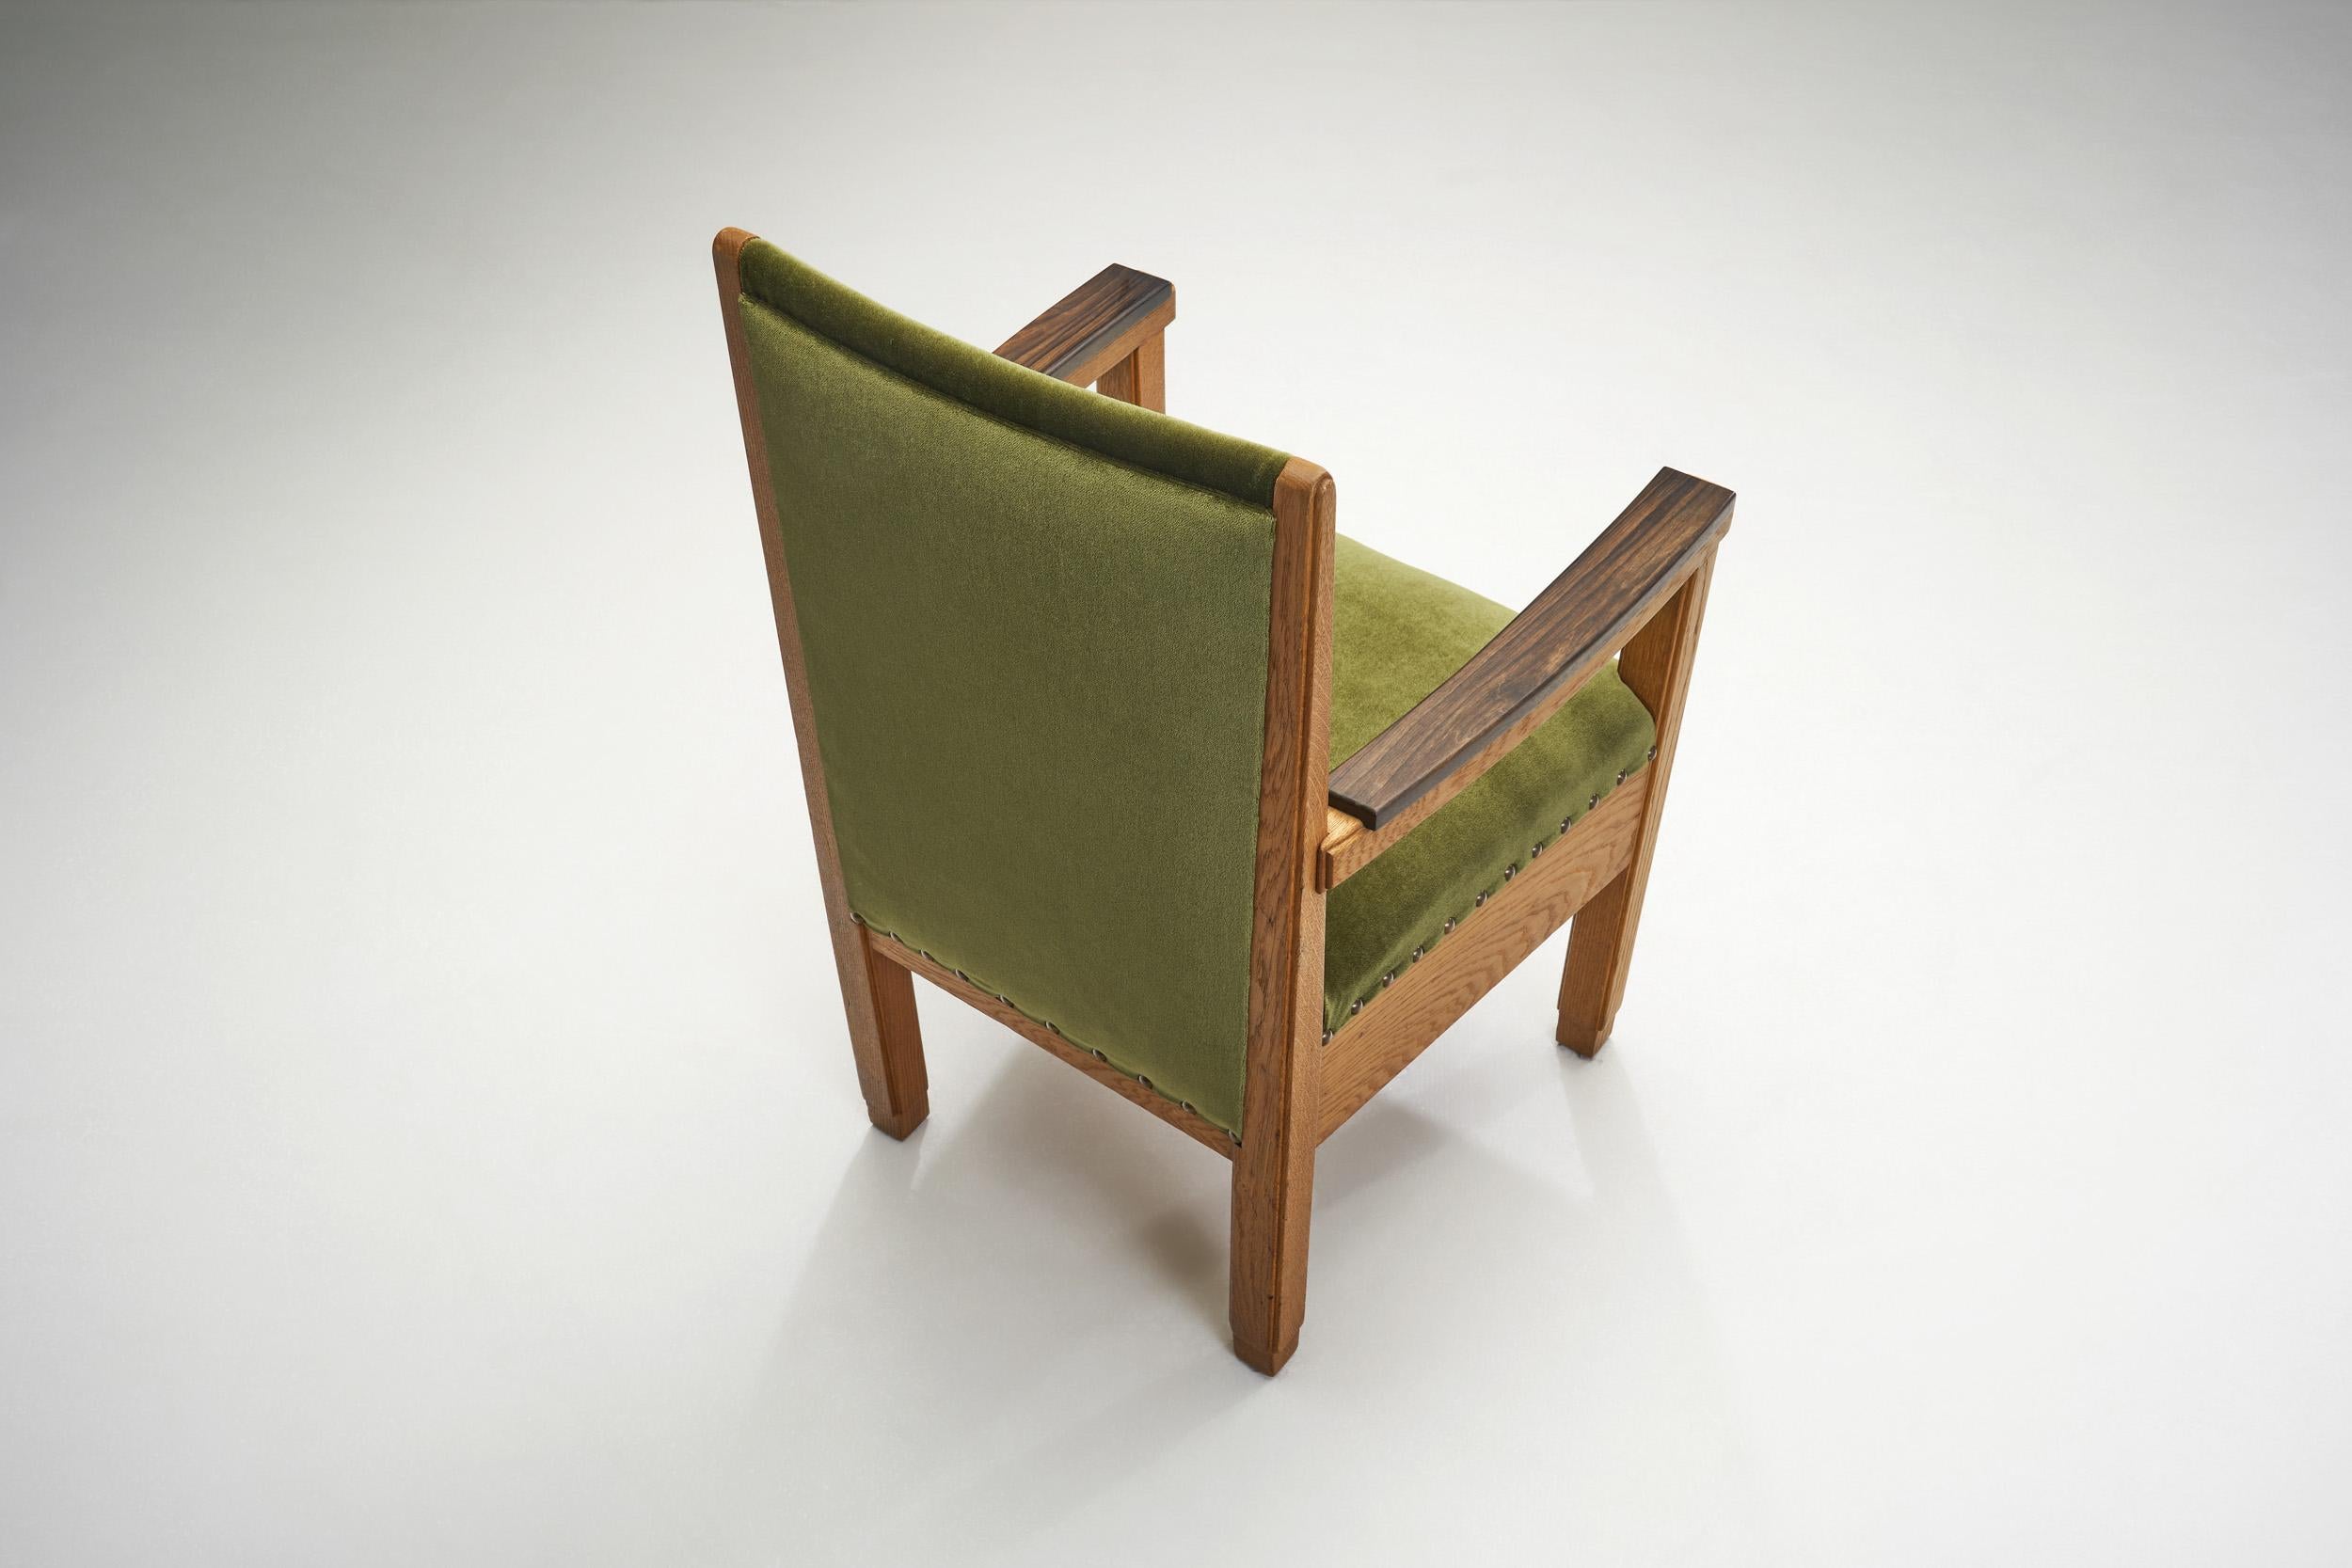 Fabric Upholstered Amsterdamse School Chairs, The Netherlands Early 20th Century For Sale